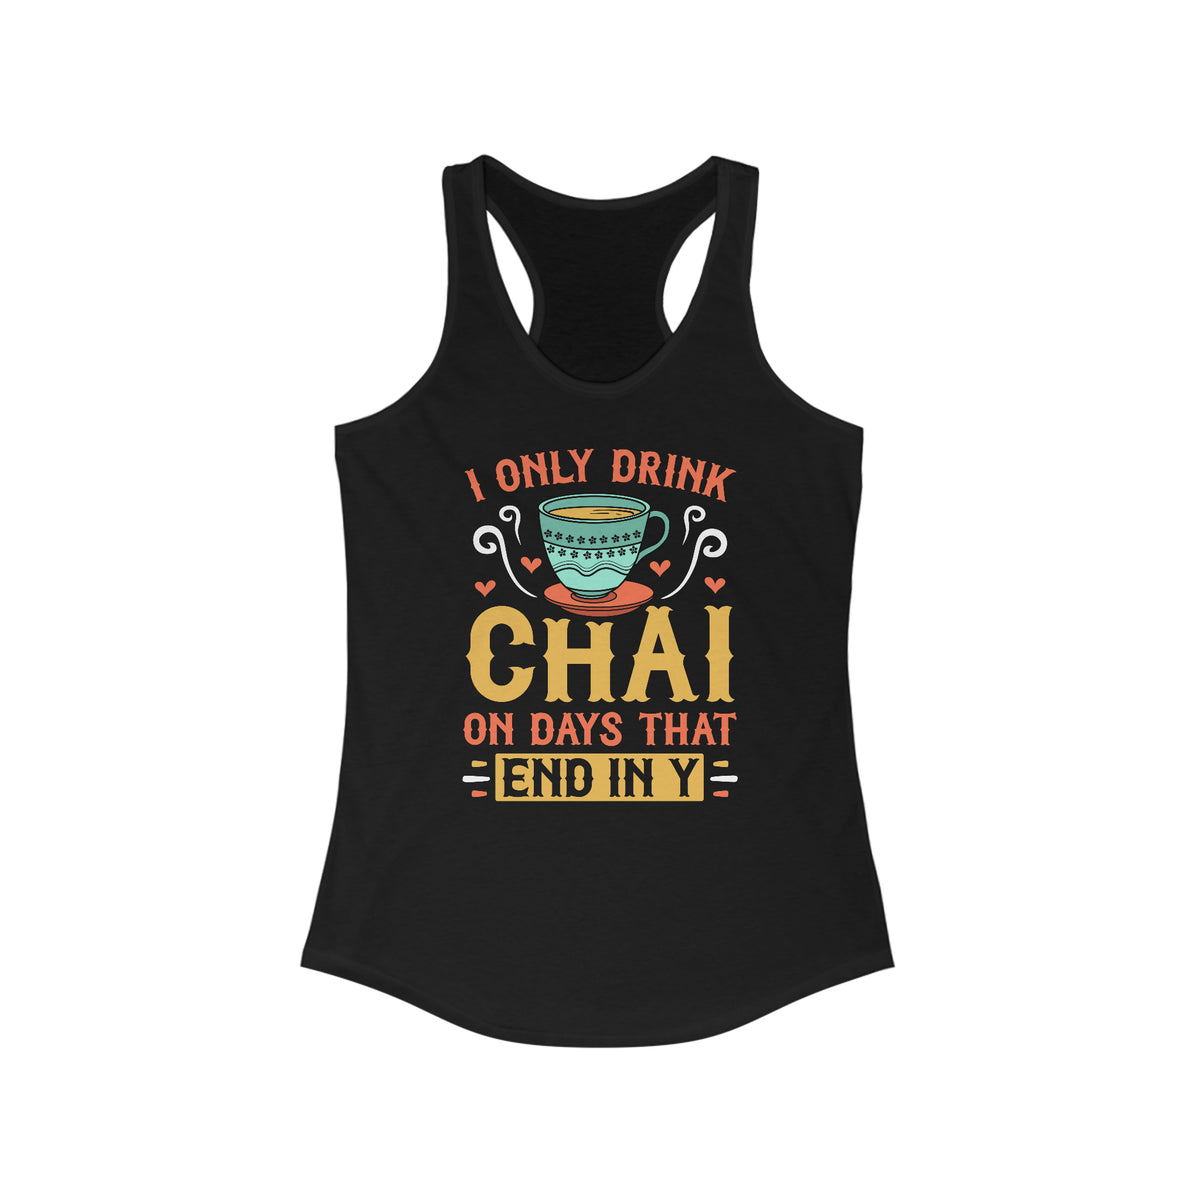 I Only Drink Chai Funny Chai Tea Shirt | Tea Lover Gift | Women's Slim-fit Racerback Tank Top